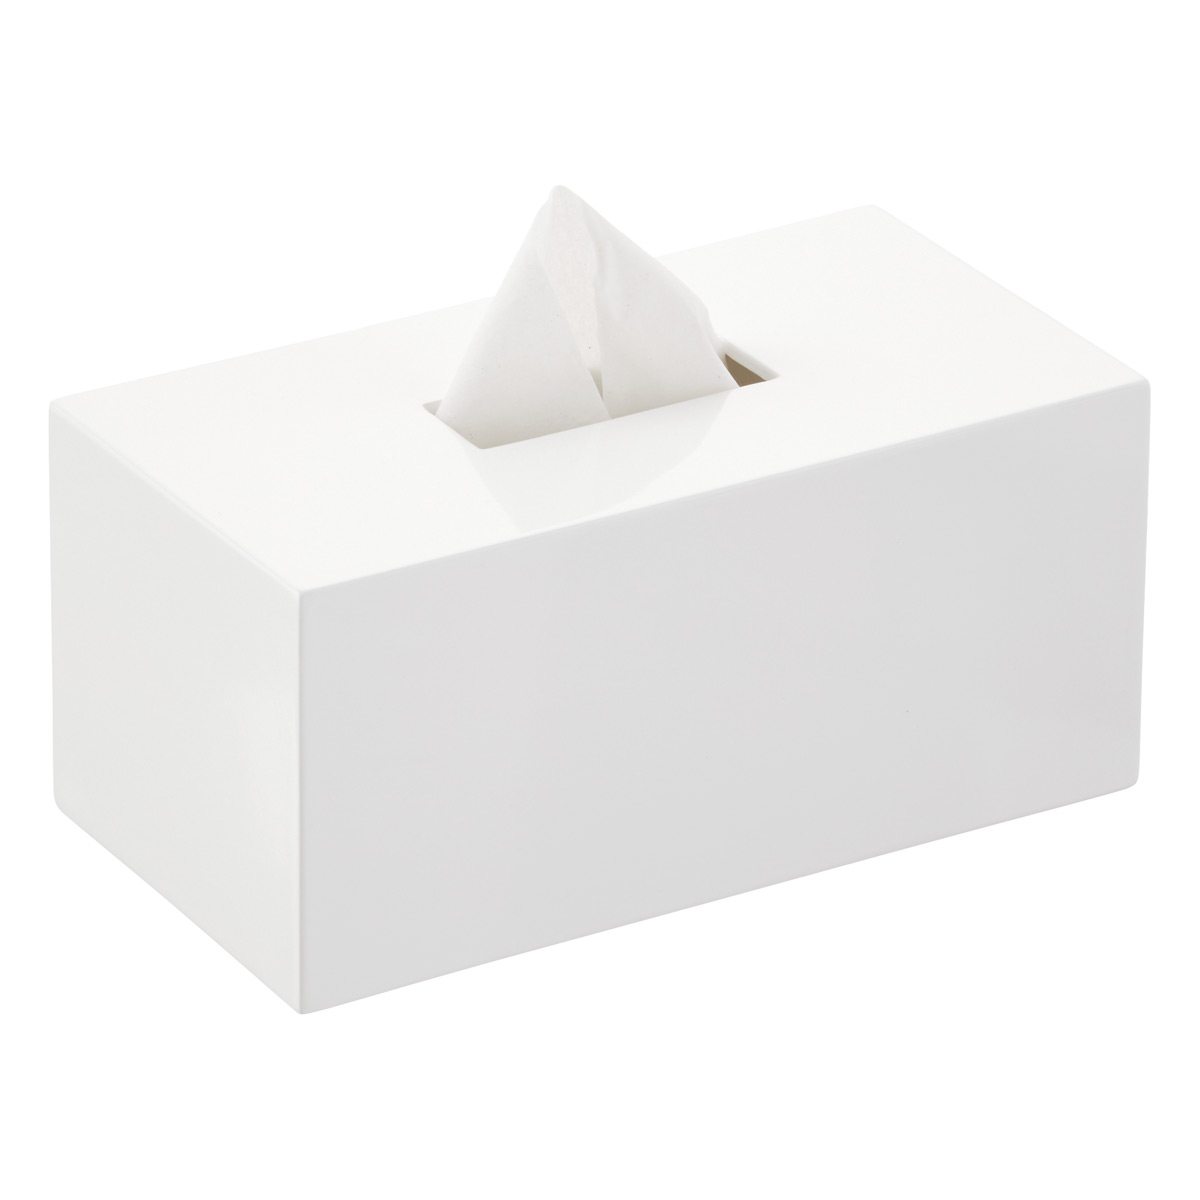 https://www.containerstore.com/catalogimages/284269/10069127LacquerTissueCoverRectWht_12.jpg